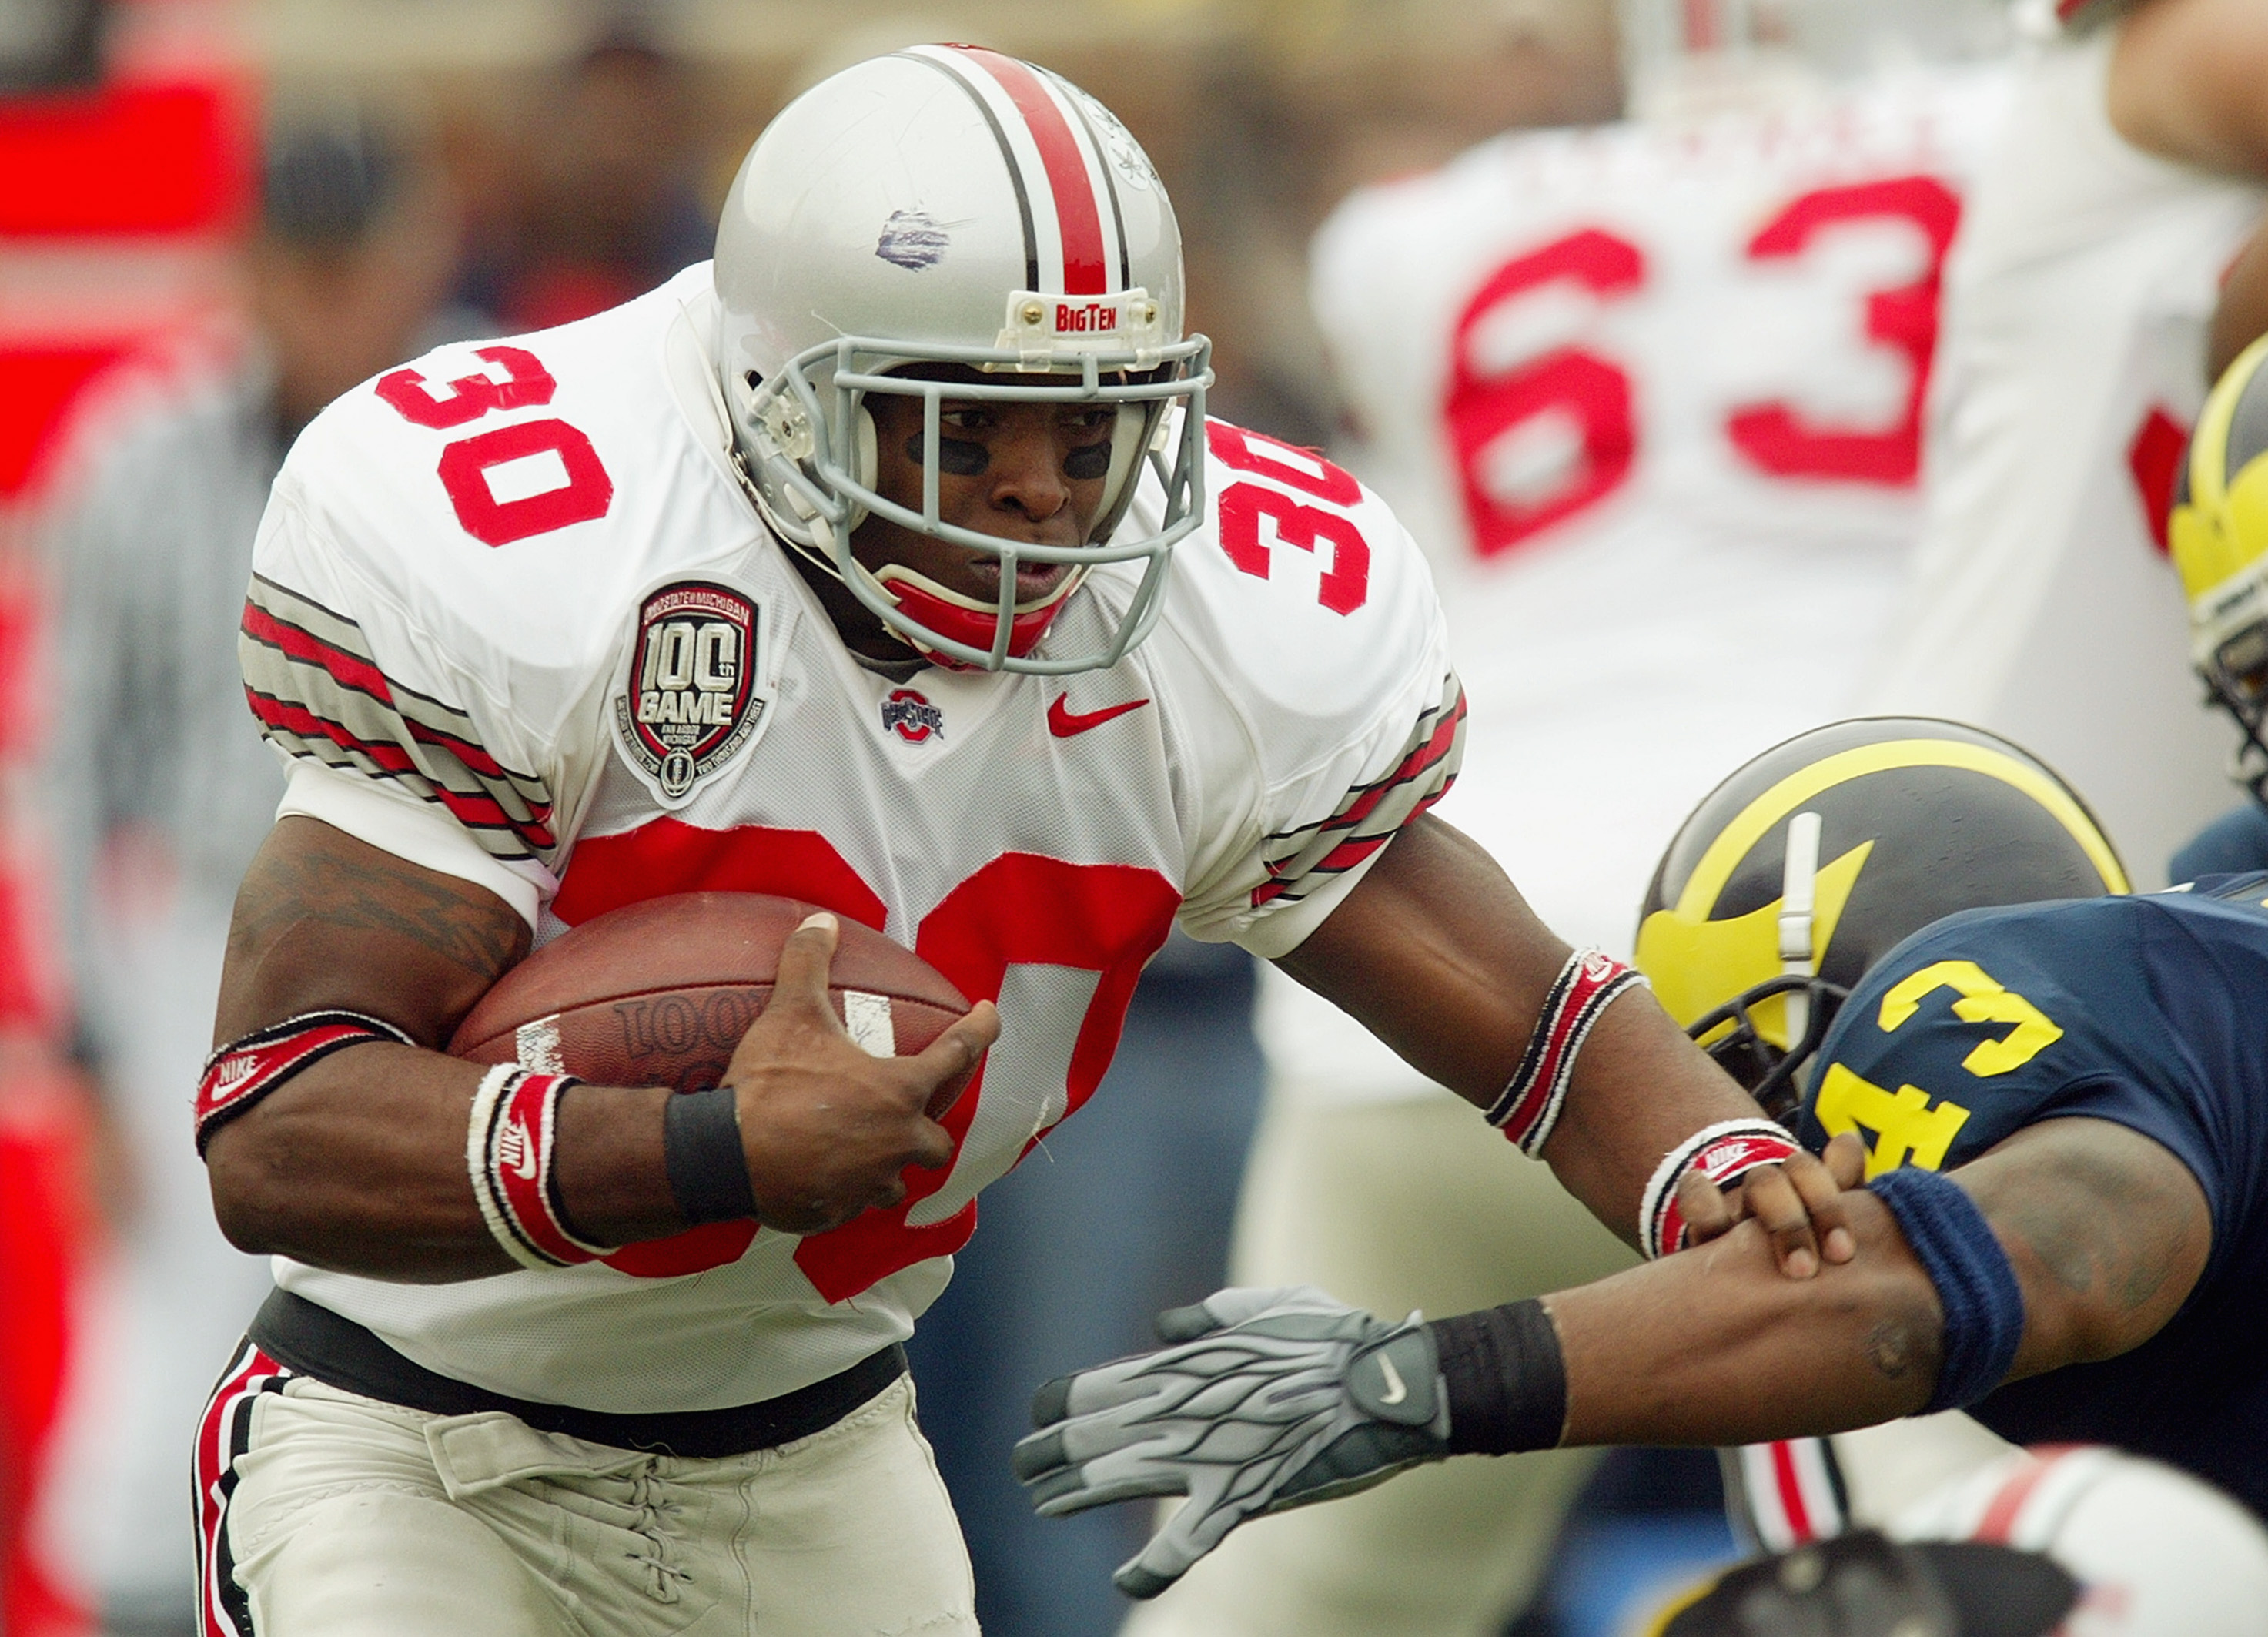 ANN ARBOR, MI - NOVEMBER 22:  Running back Lydell Ross #30 of the Ohio State Buckeyes runs the football as linebacker Carl Diggs #43 of the Michigan Wolverines in the 100th meeting of the two teams November 22, 2003 at Michigan Stadium in Ann Arbor, Michi